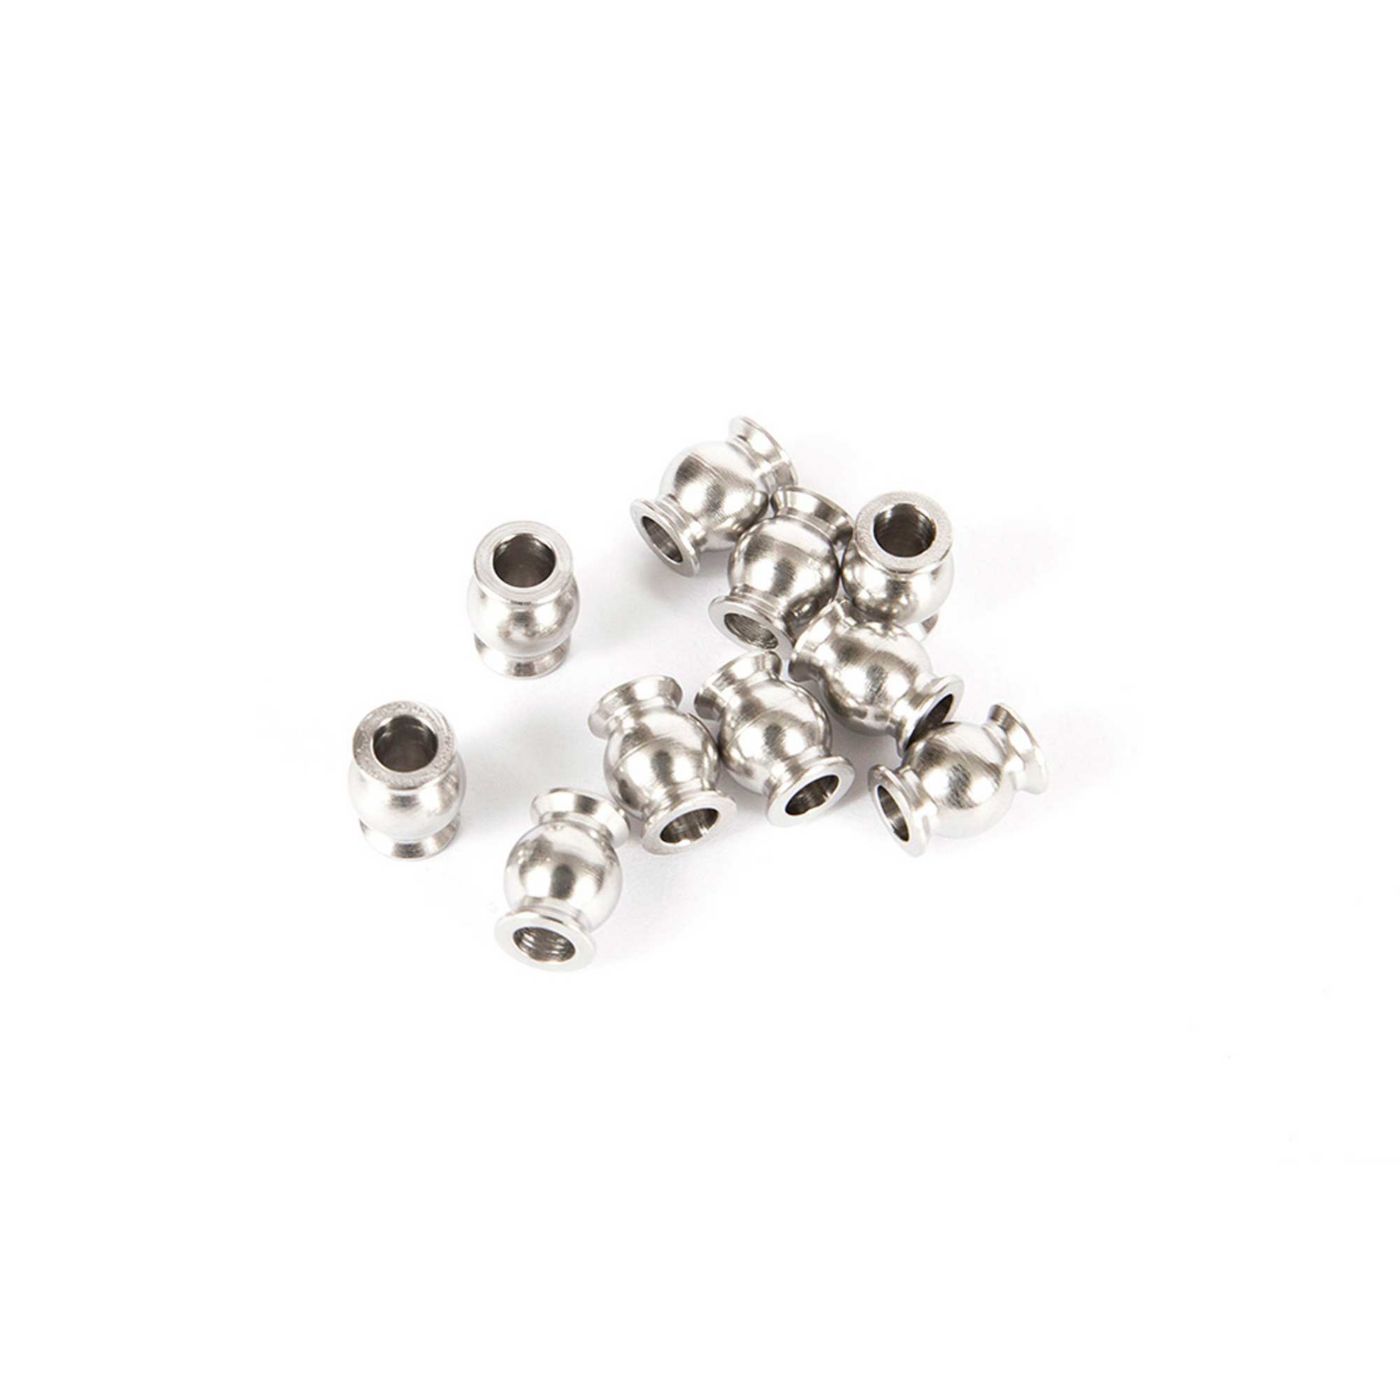 Axial Susp Pivot Ball, Stainless Steel 7.5mm (10) - AXI234004